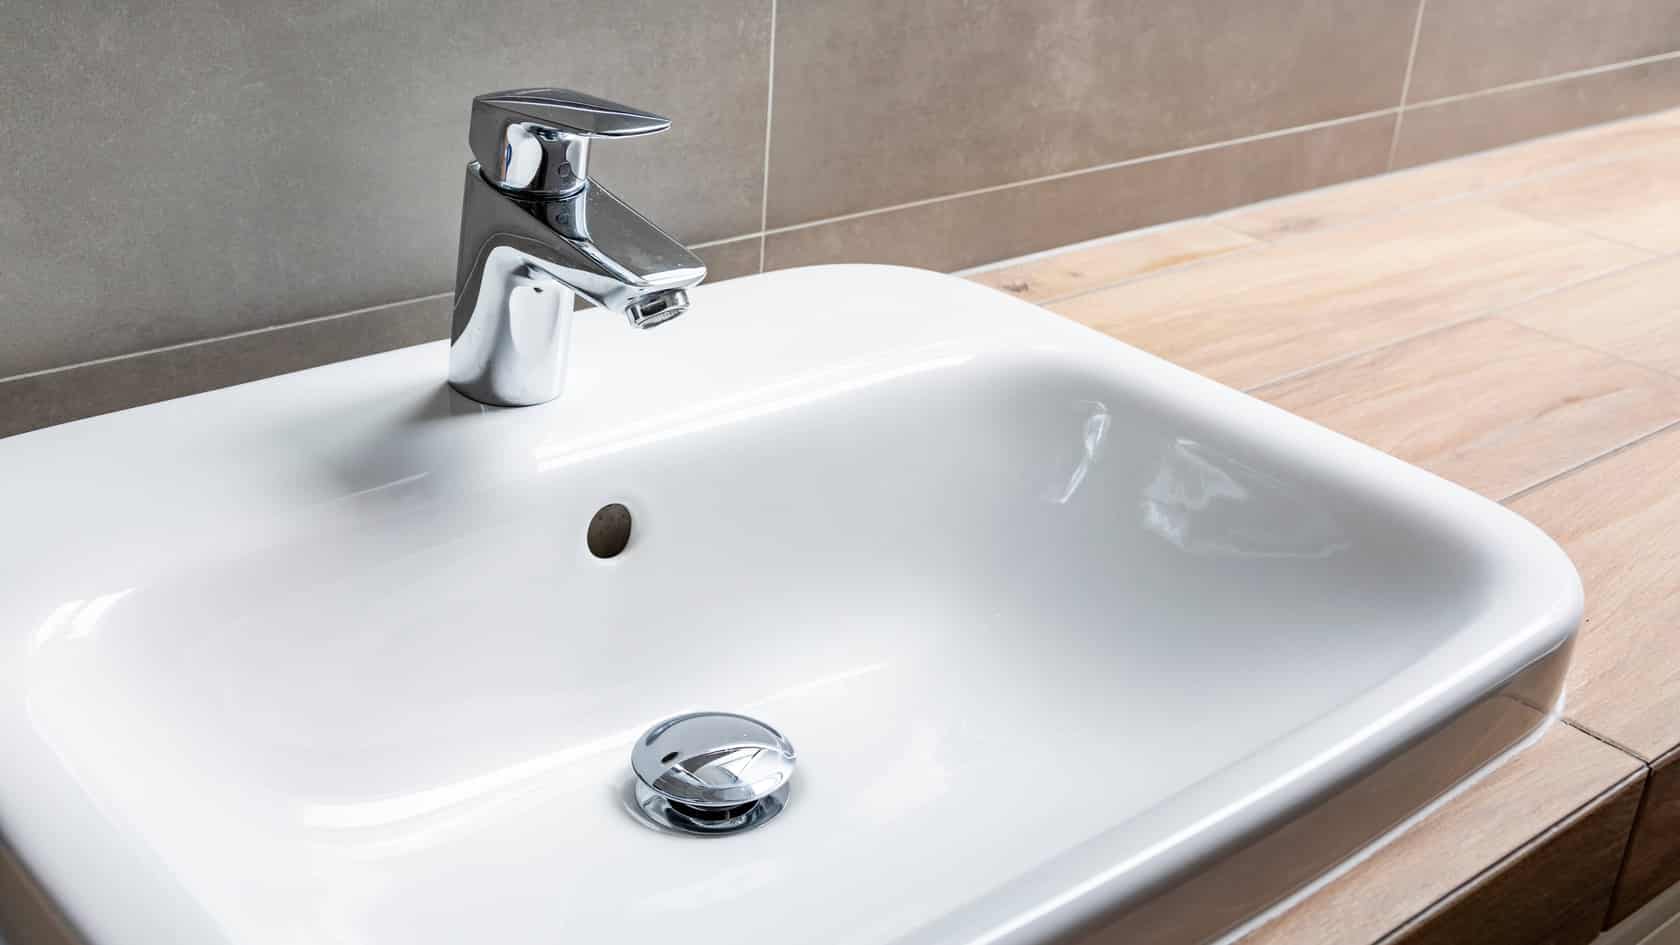 Drain stopper in bathroom sink can be removed if the drain is clogged or needs cleaning.